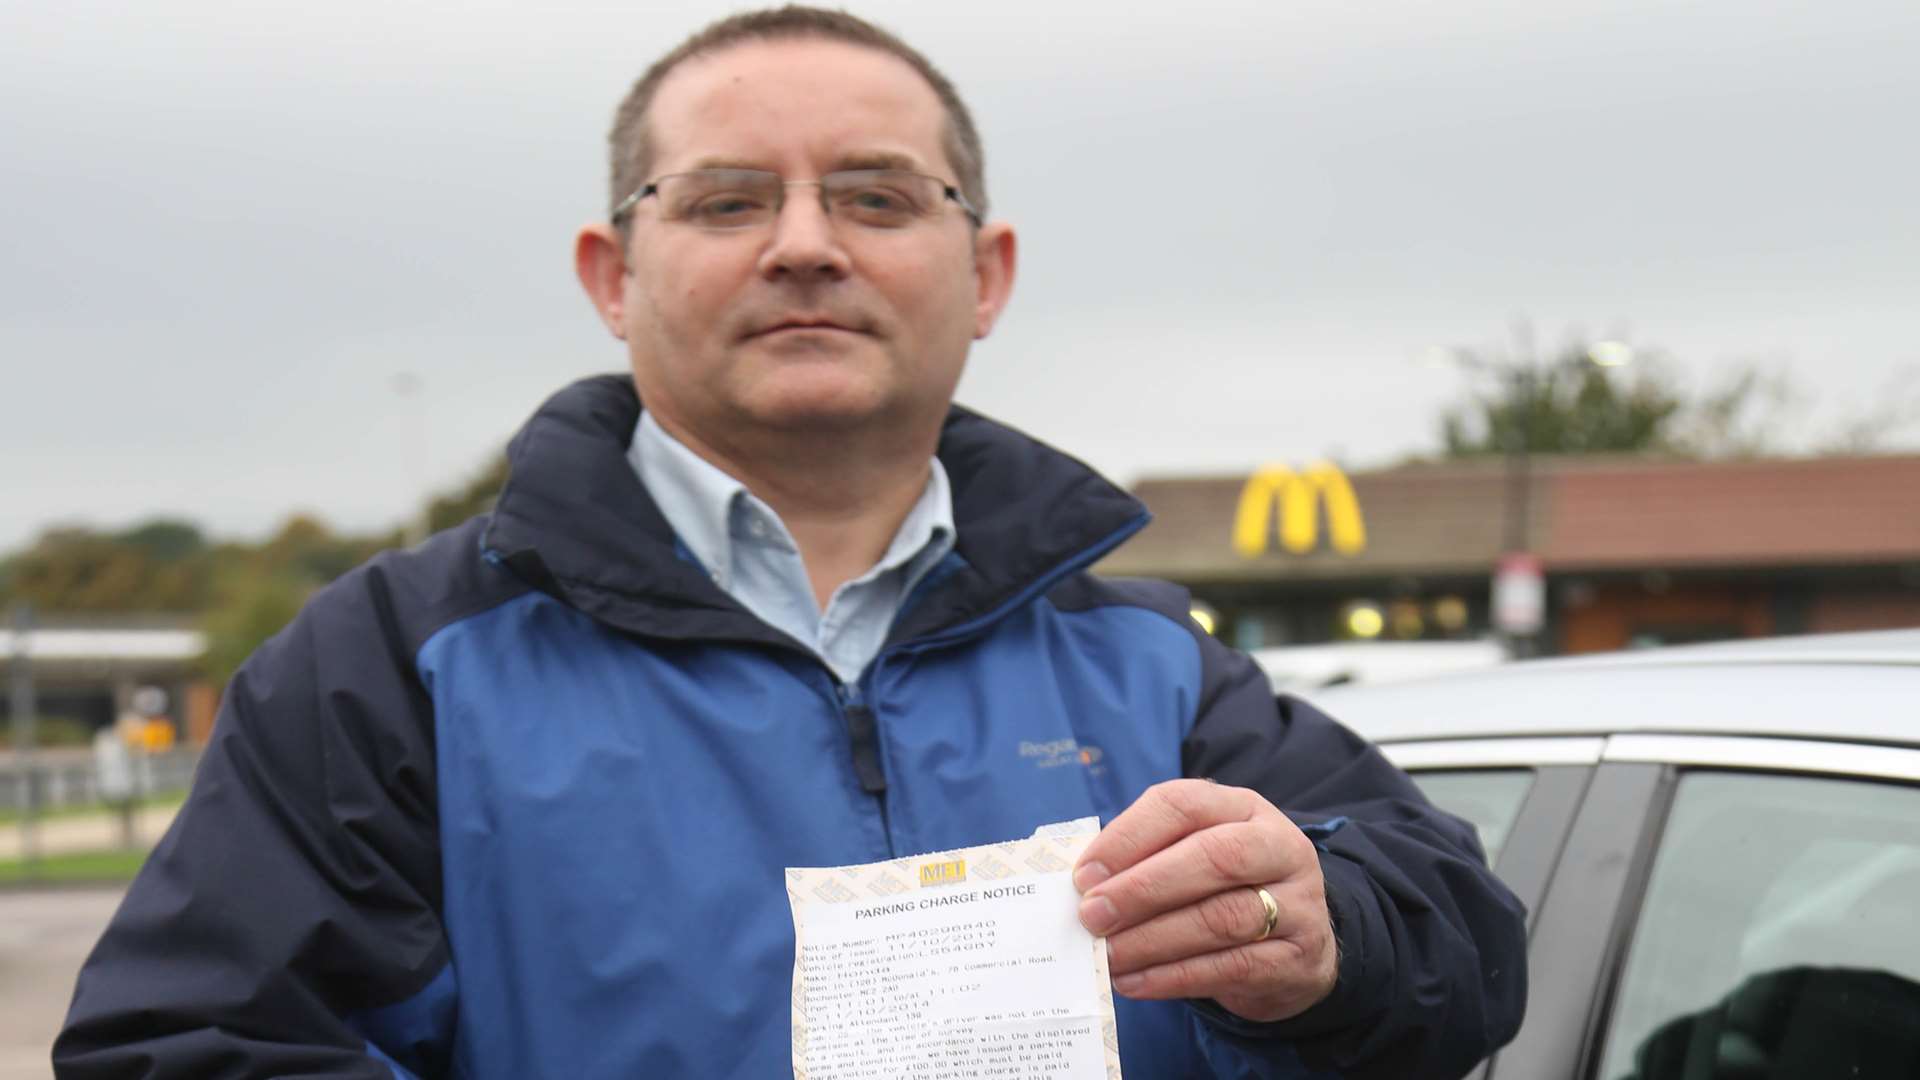 Neil Samworth was given a ticket at McDonald's in Strood. Picture: Darren Small.